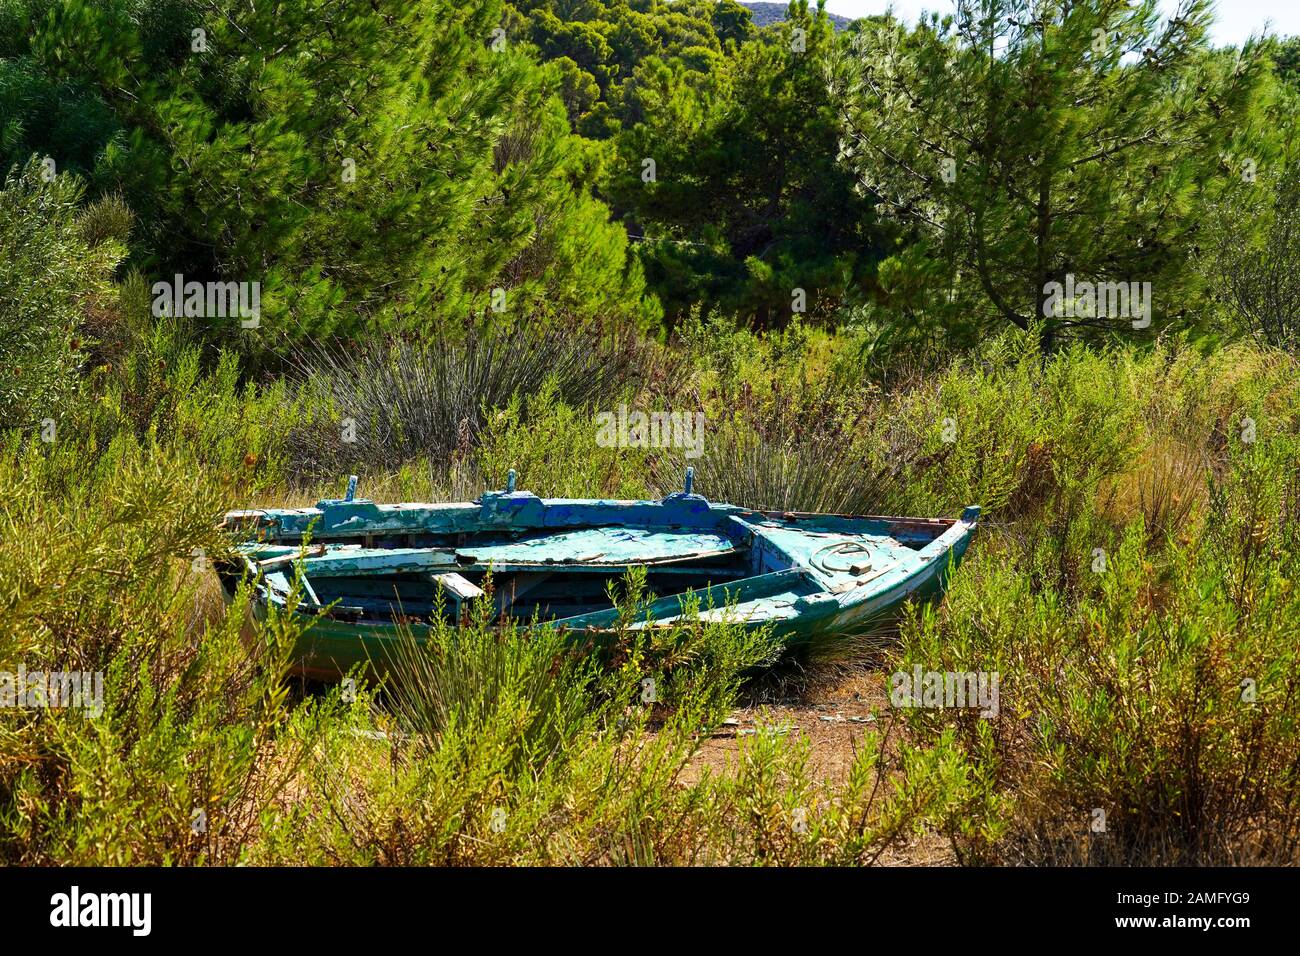 A deserted rowing boat on land Photographed on the Greek Island of Cephalonia, Ionian Sea, Greece Stock Photo